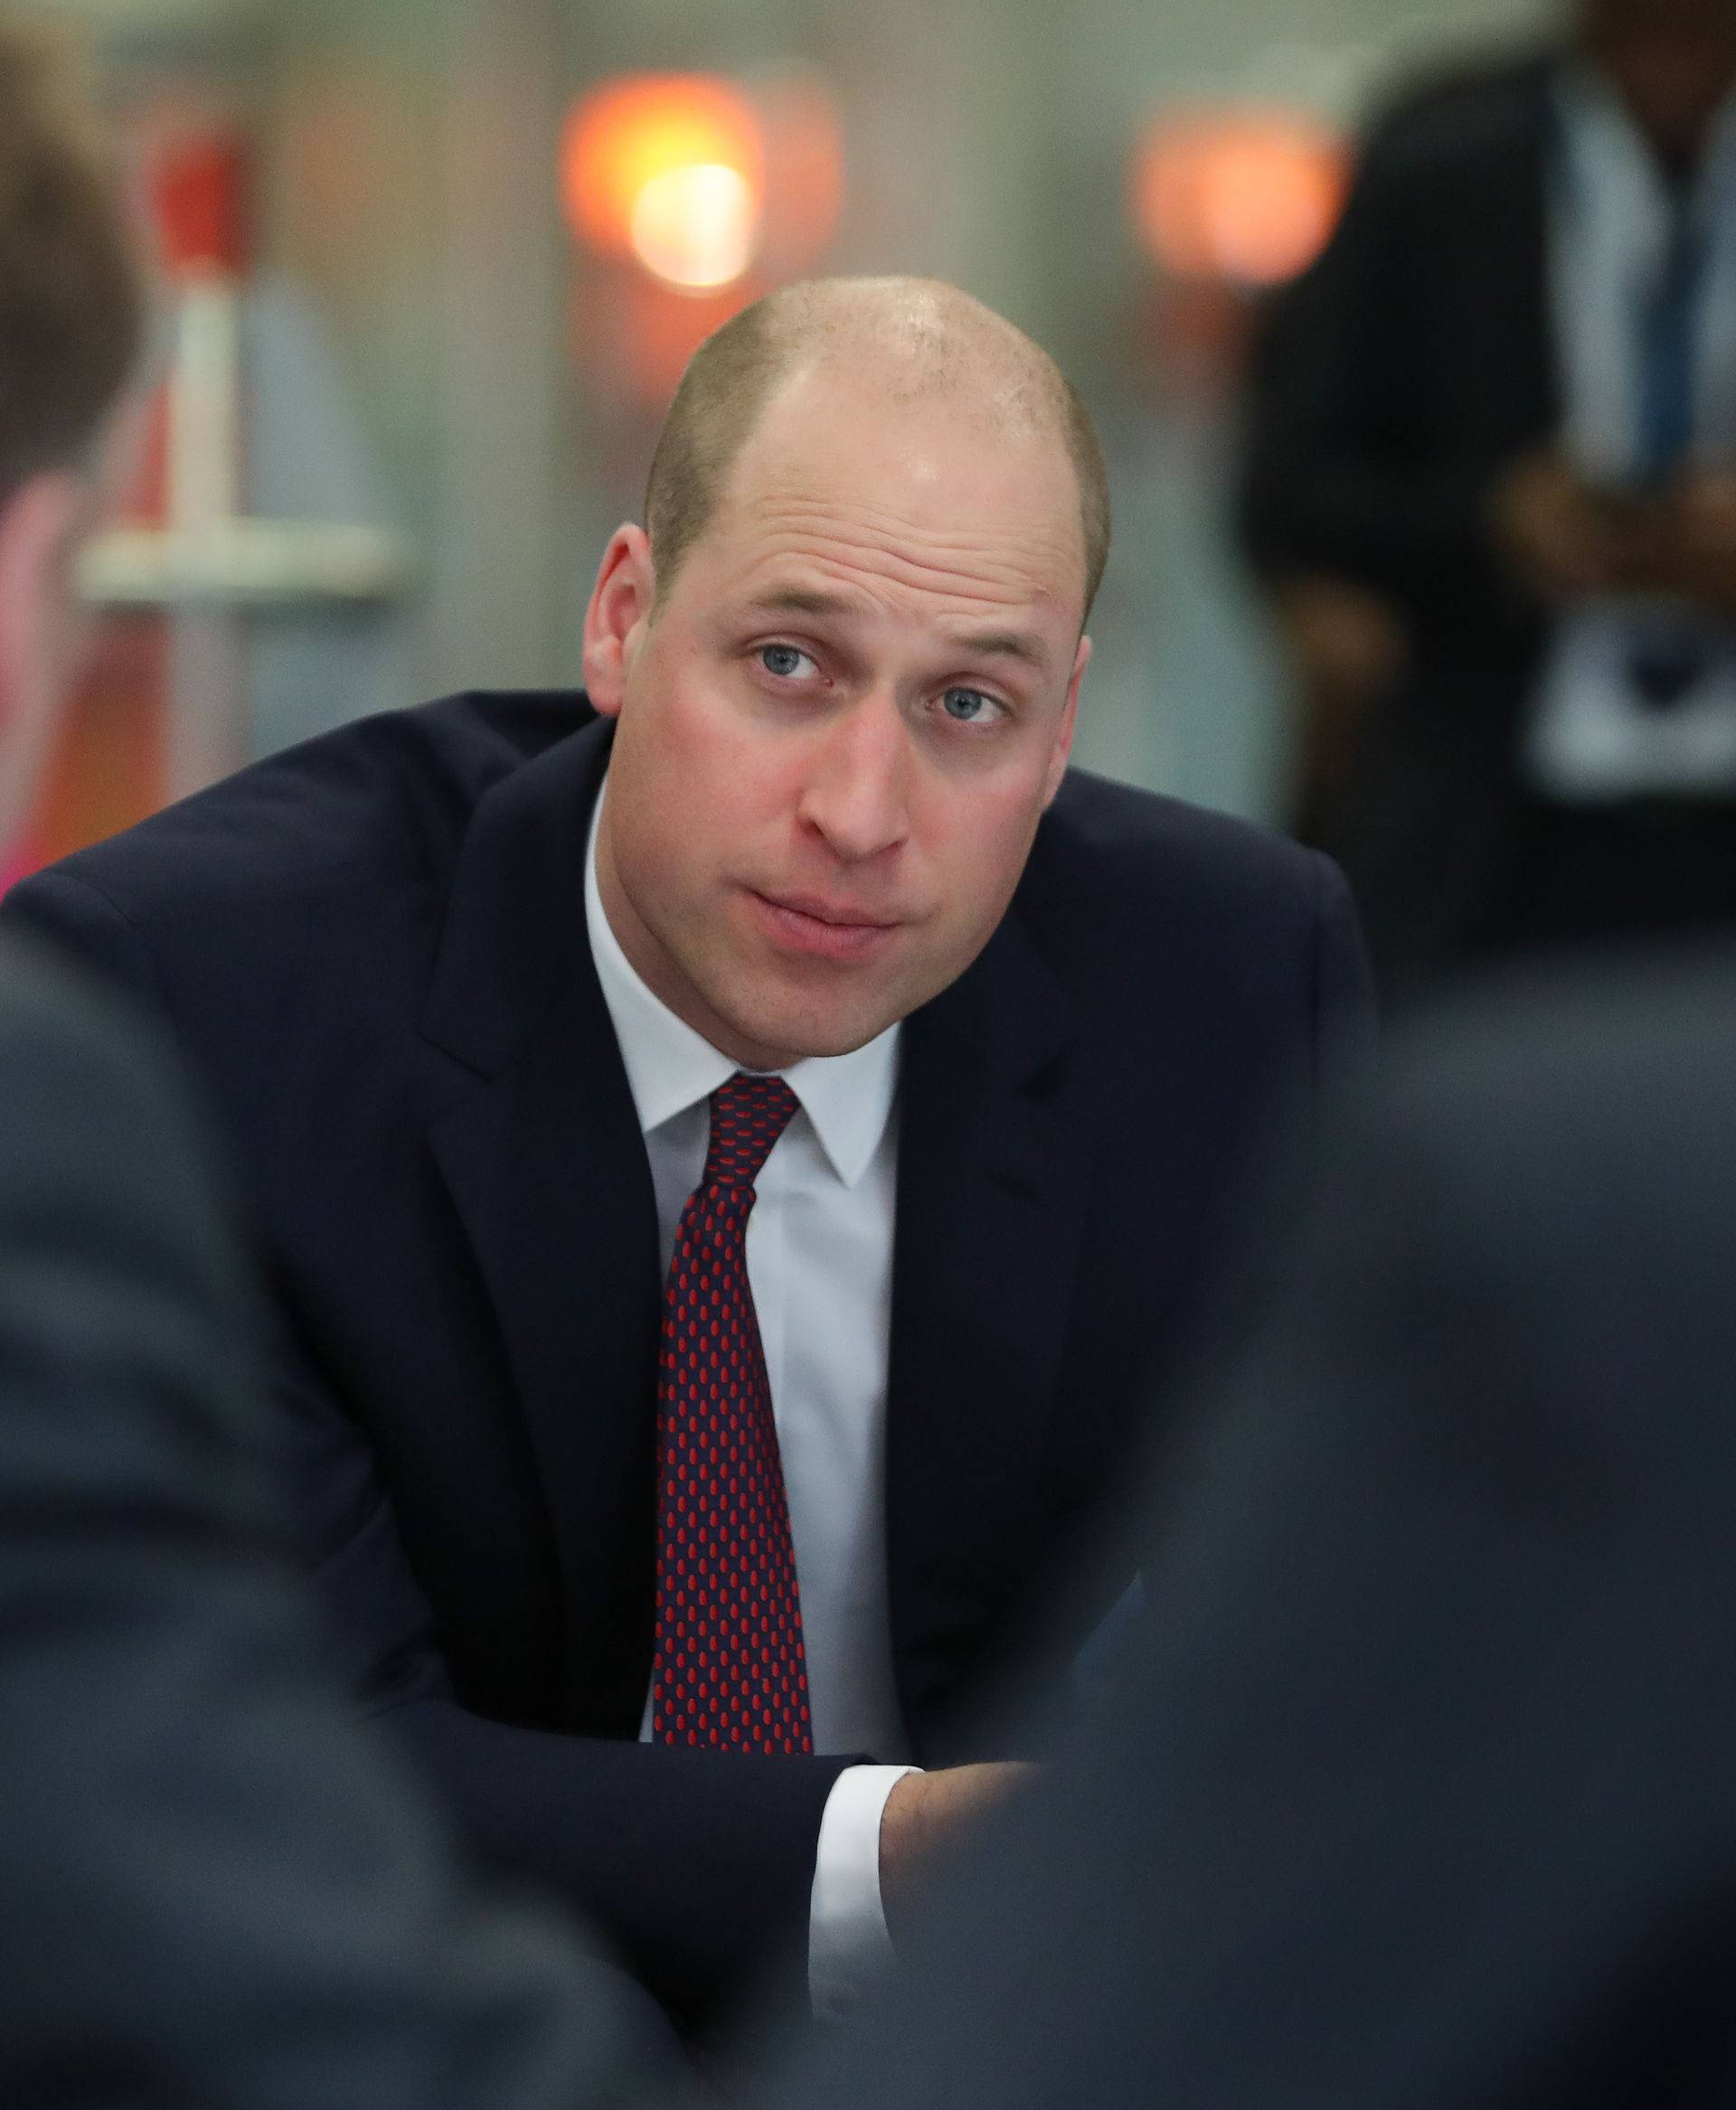 Duke of Cambridge launches Step into Health programme